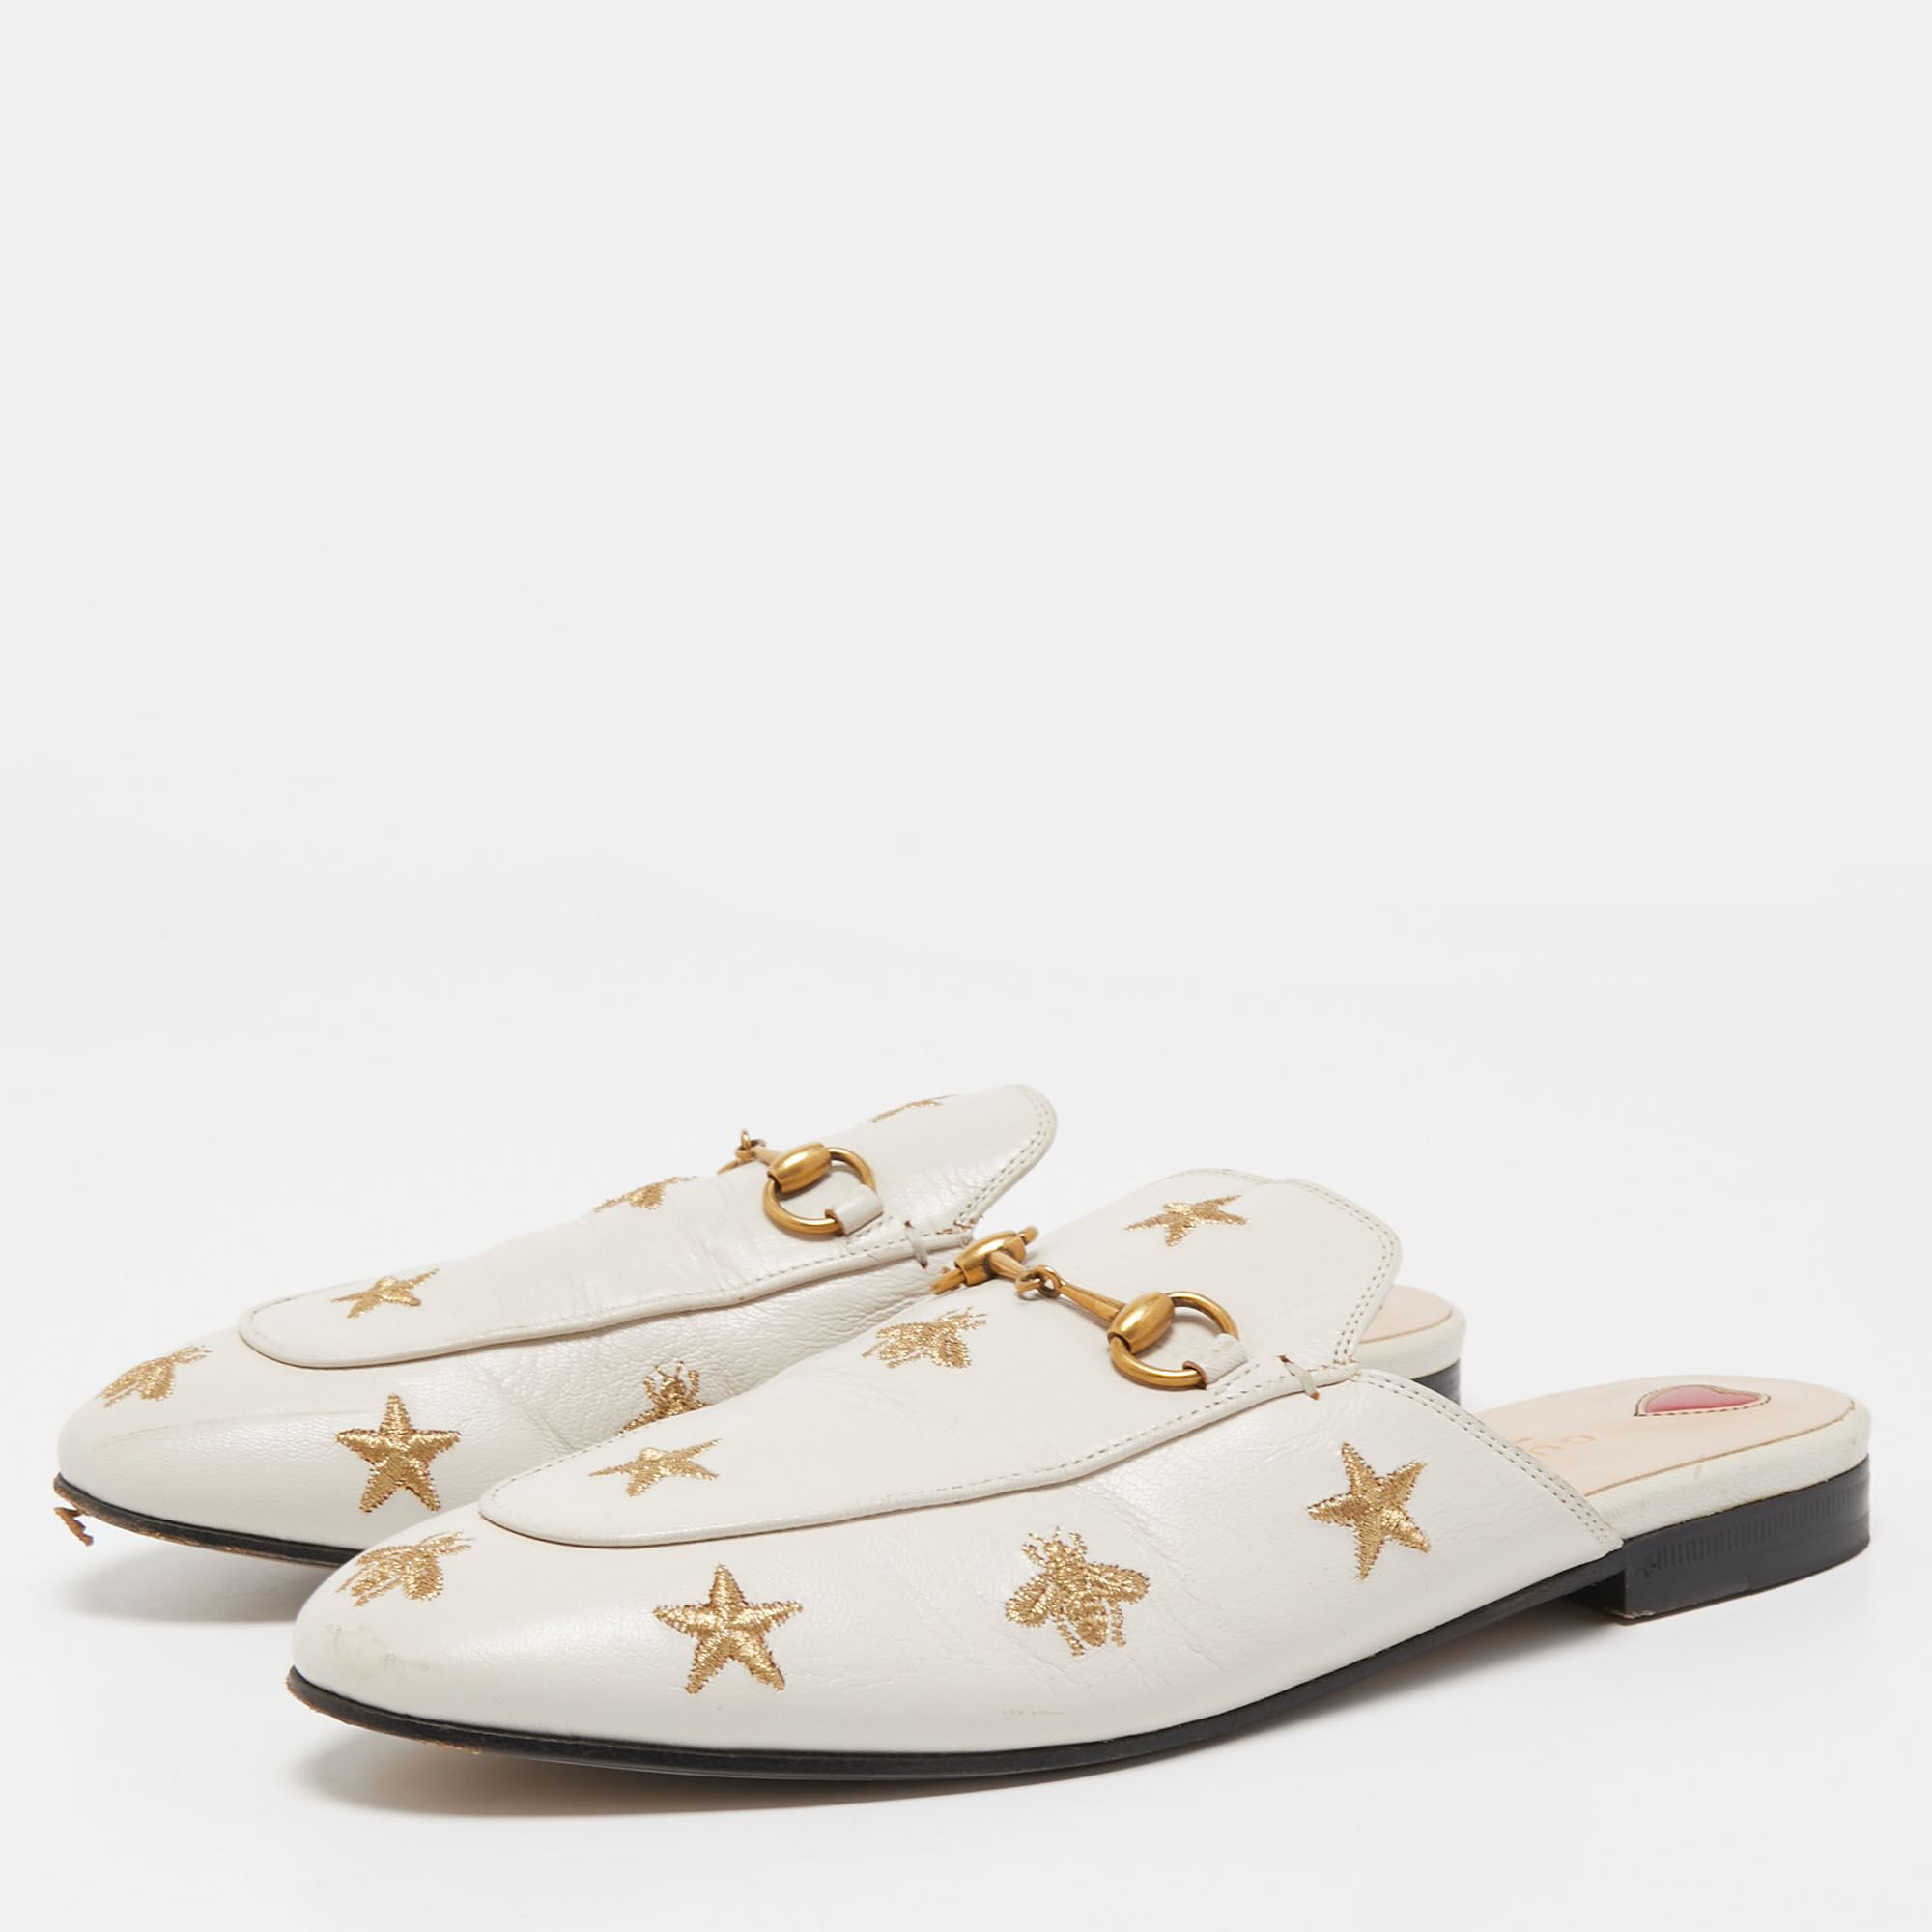 

Gucci Cream Leather Bee and Star Embroidered Princetown Flat Mules Size